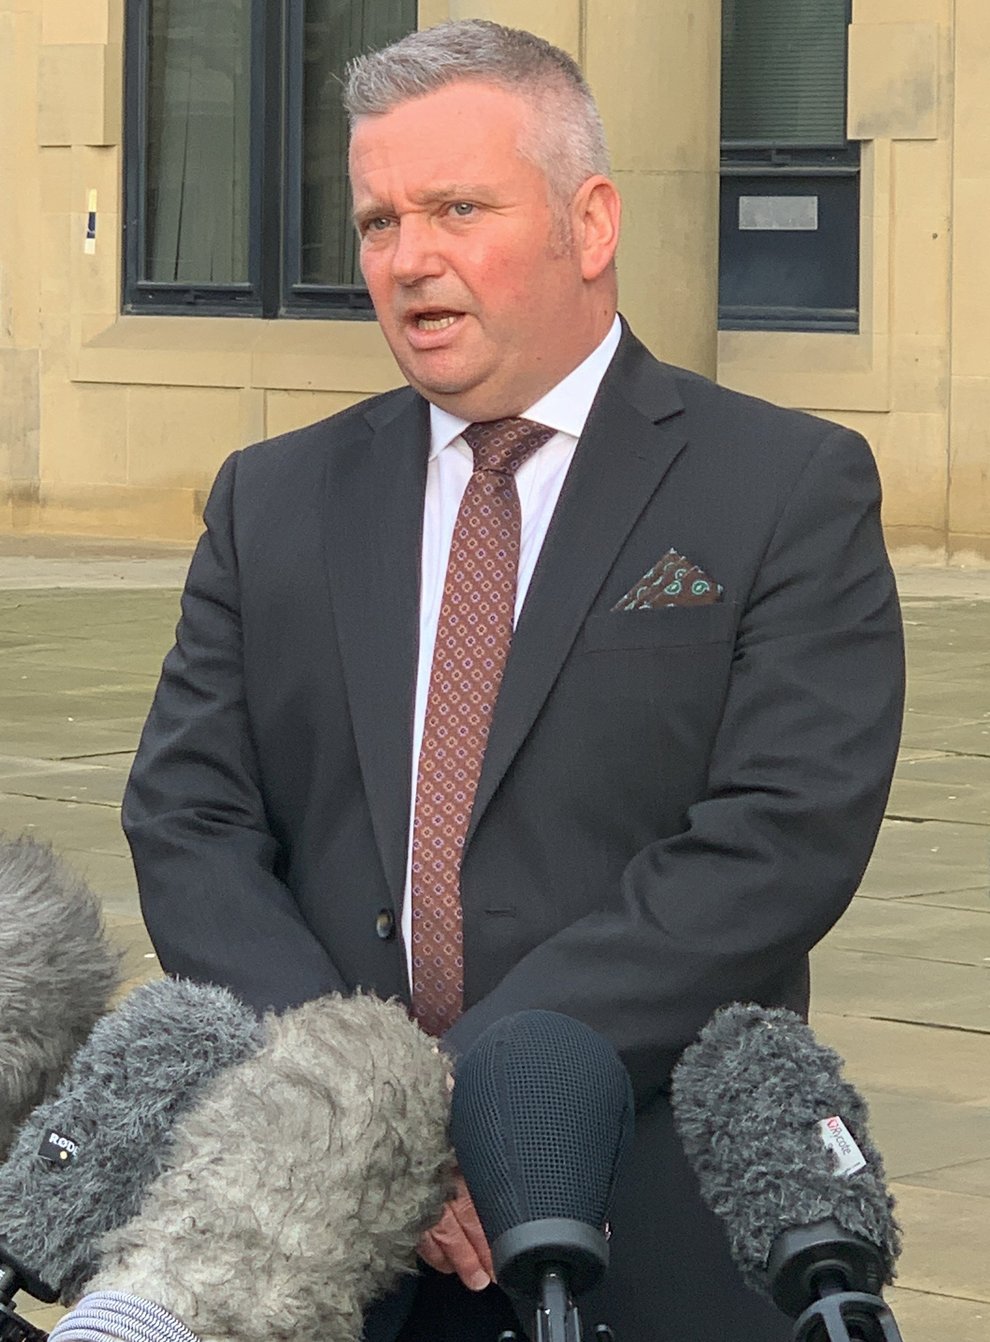 Detective Chief Superintendent Mark Swift, of West Yorkshire Police, spoke to the media outside Bradford Crown Court (Dave Higgins/PA)